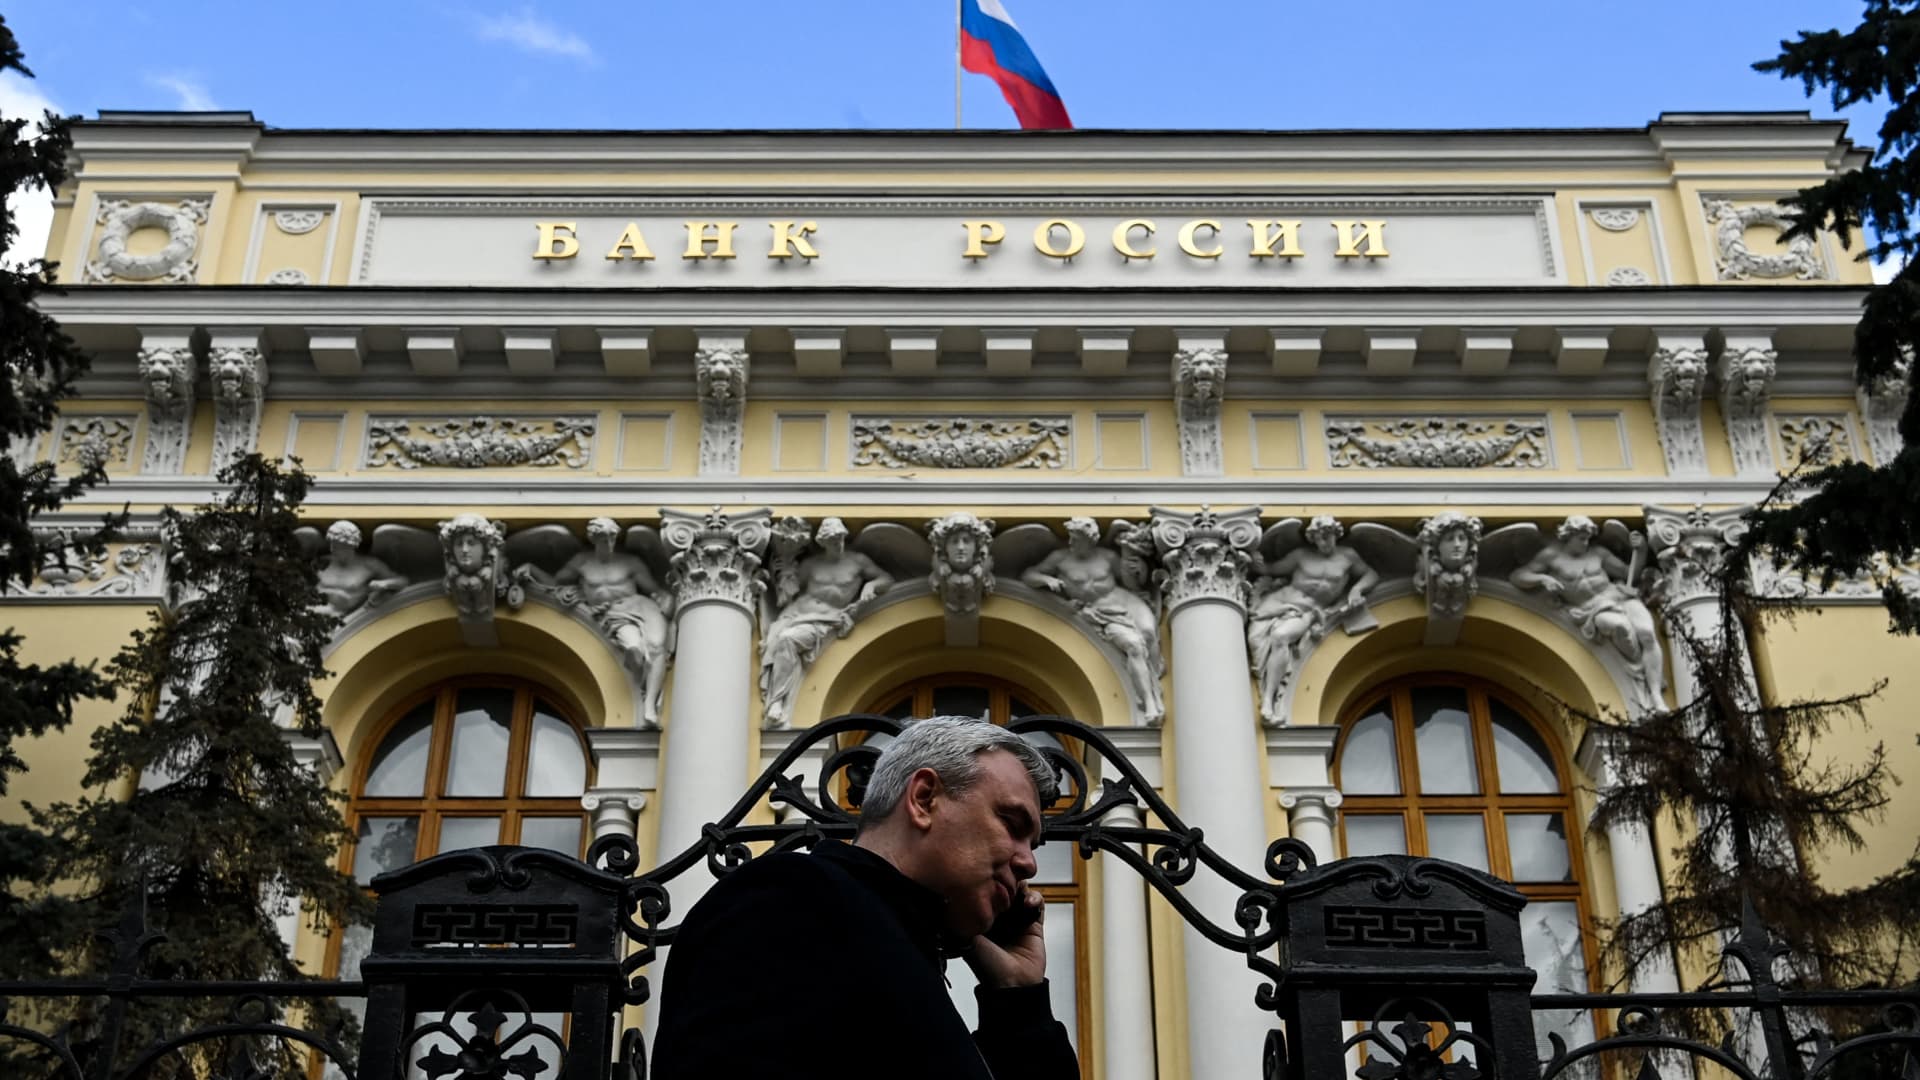 MOSCOW, Russia: The Russian central bank has implemented a range of capital controls in a bid to support domestic assets and the ruble currency, as international sanctions squeeze the economy following Russia's invasion of Ukraine.